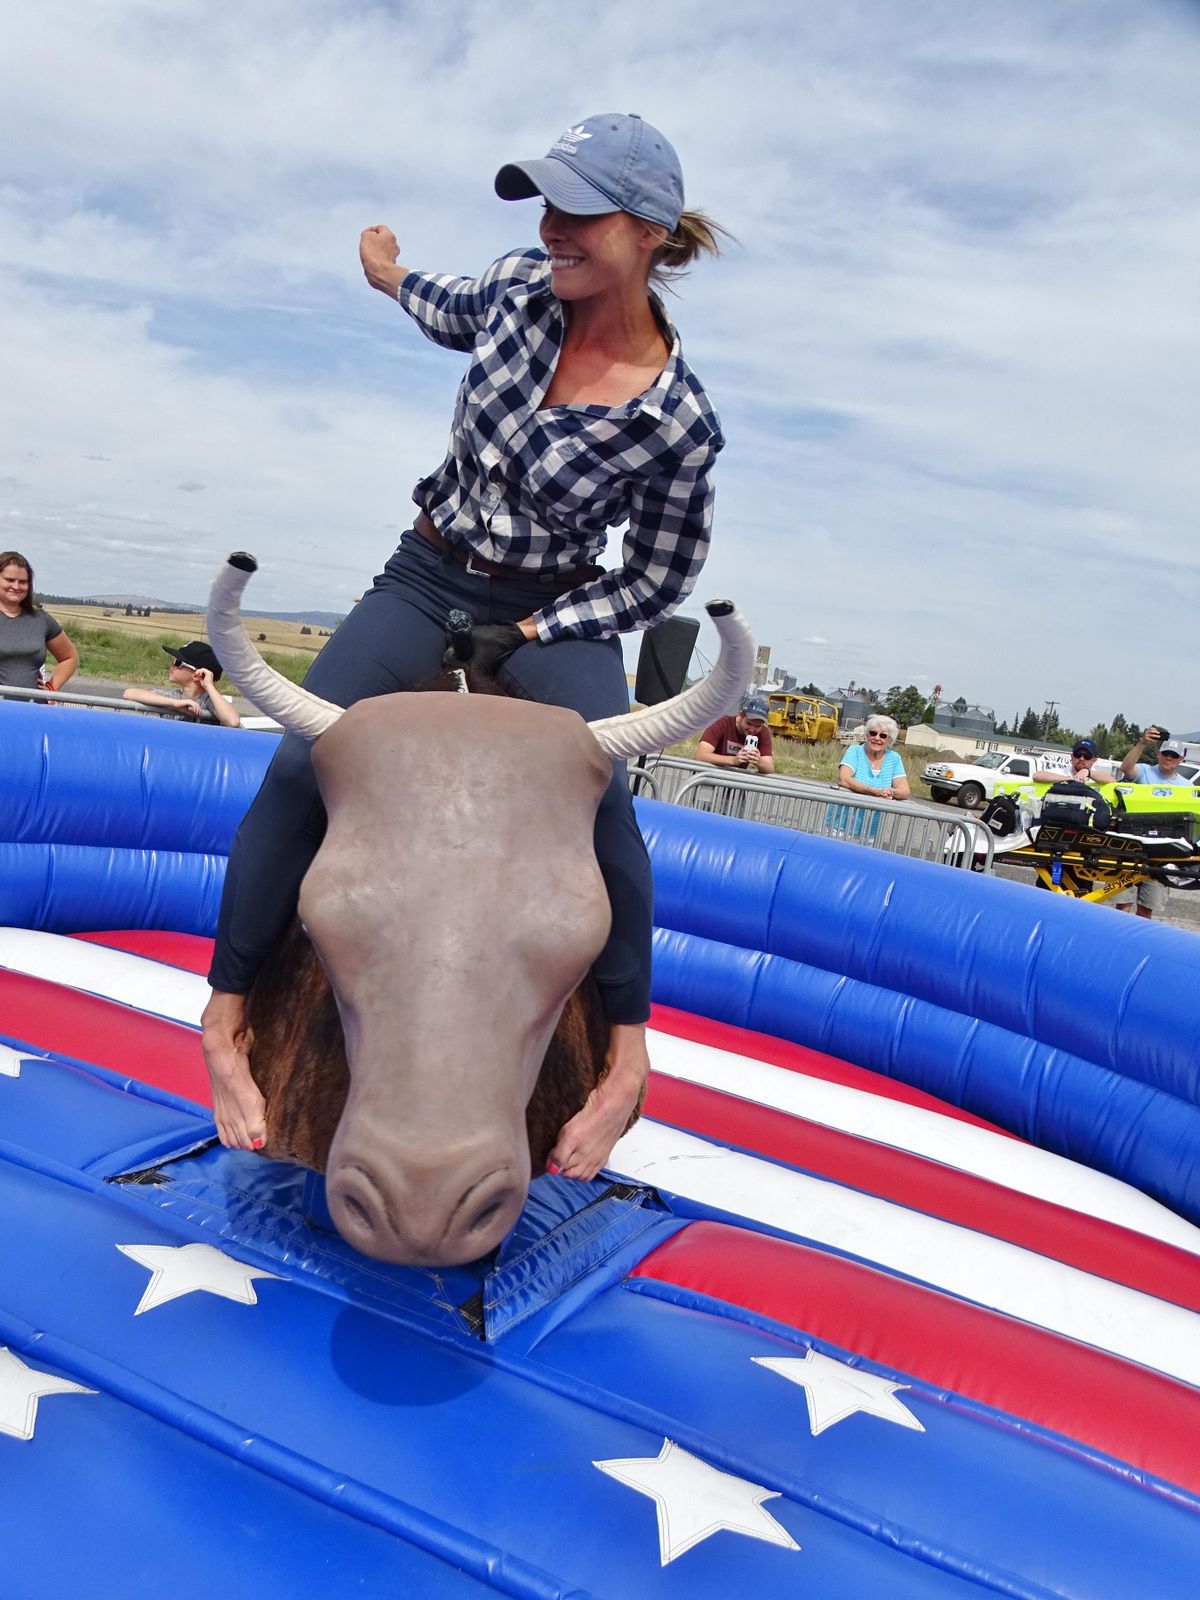 Laura Moore, a Washington State University equestrian team coach from Moscow, Idaho, hangs on to capture first place at the mechanical bull “world championship” in Spangle on Saturday, Aug. 24, 2019. (Courtesy, Melaine Williams)